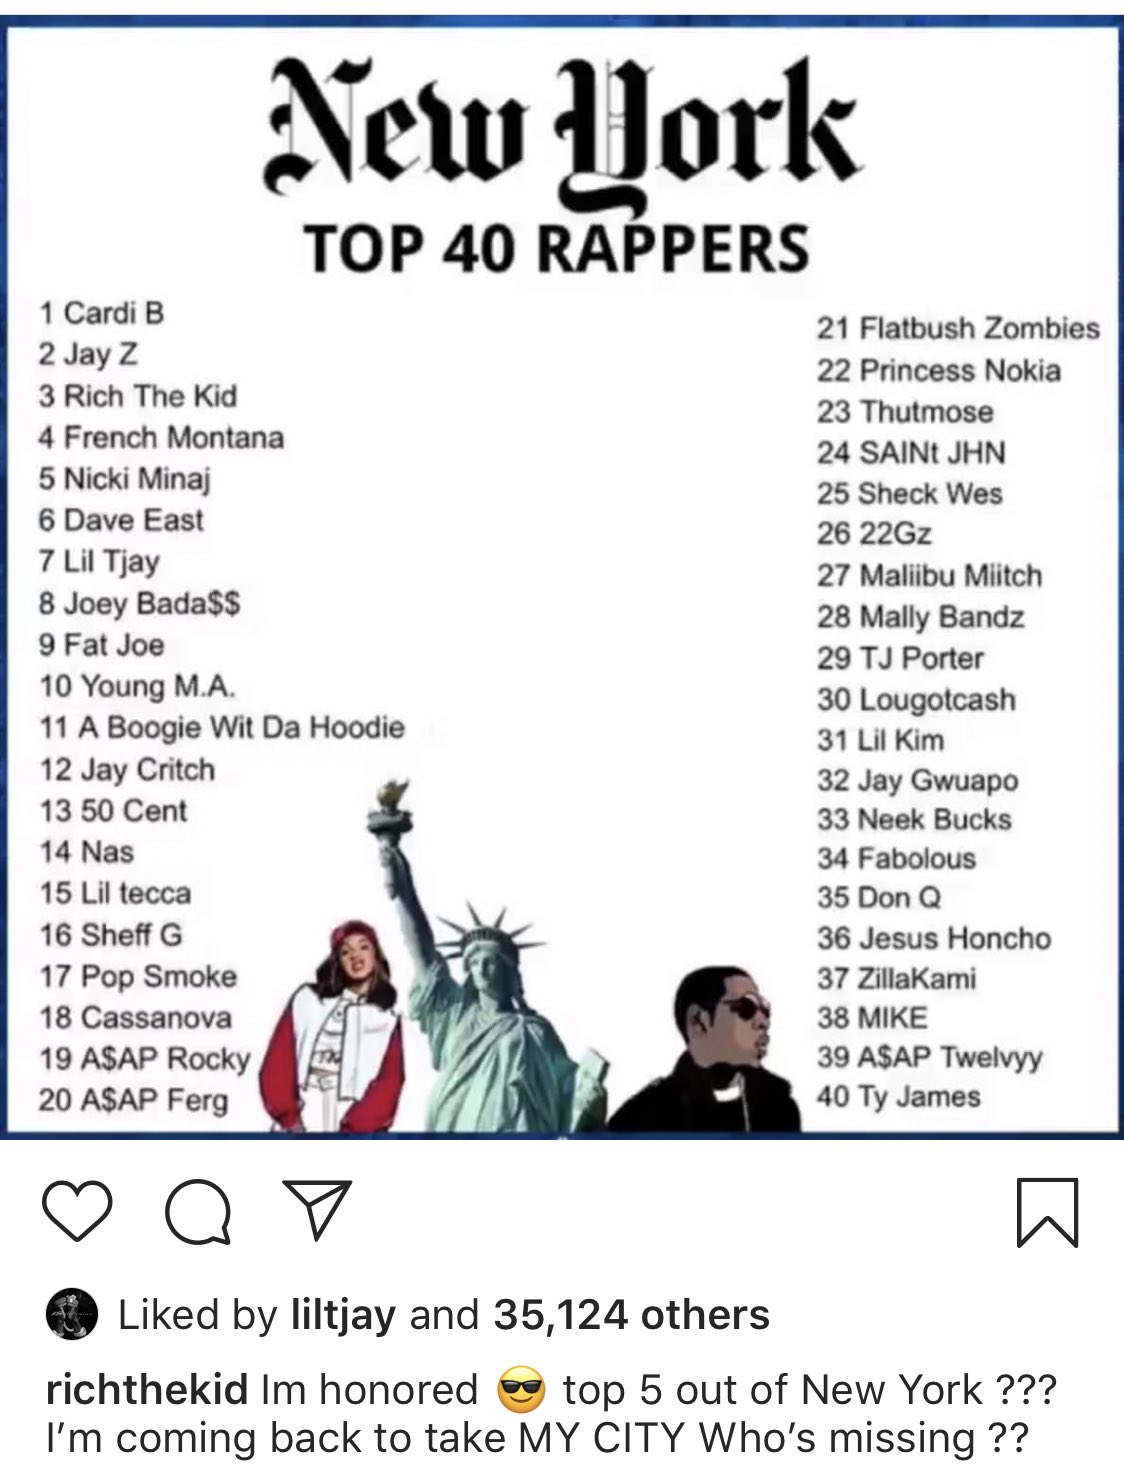 DJ Akademiks on Twitter: "Rich the Kid in on the top 40 rappers outta York list. Y'all agree with this ranking?? Who too high or too low? https://t.co/k5Rk2jbeFU" / Twitter